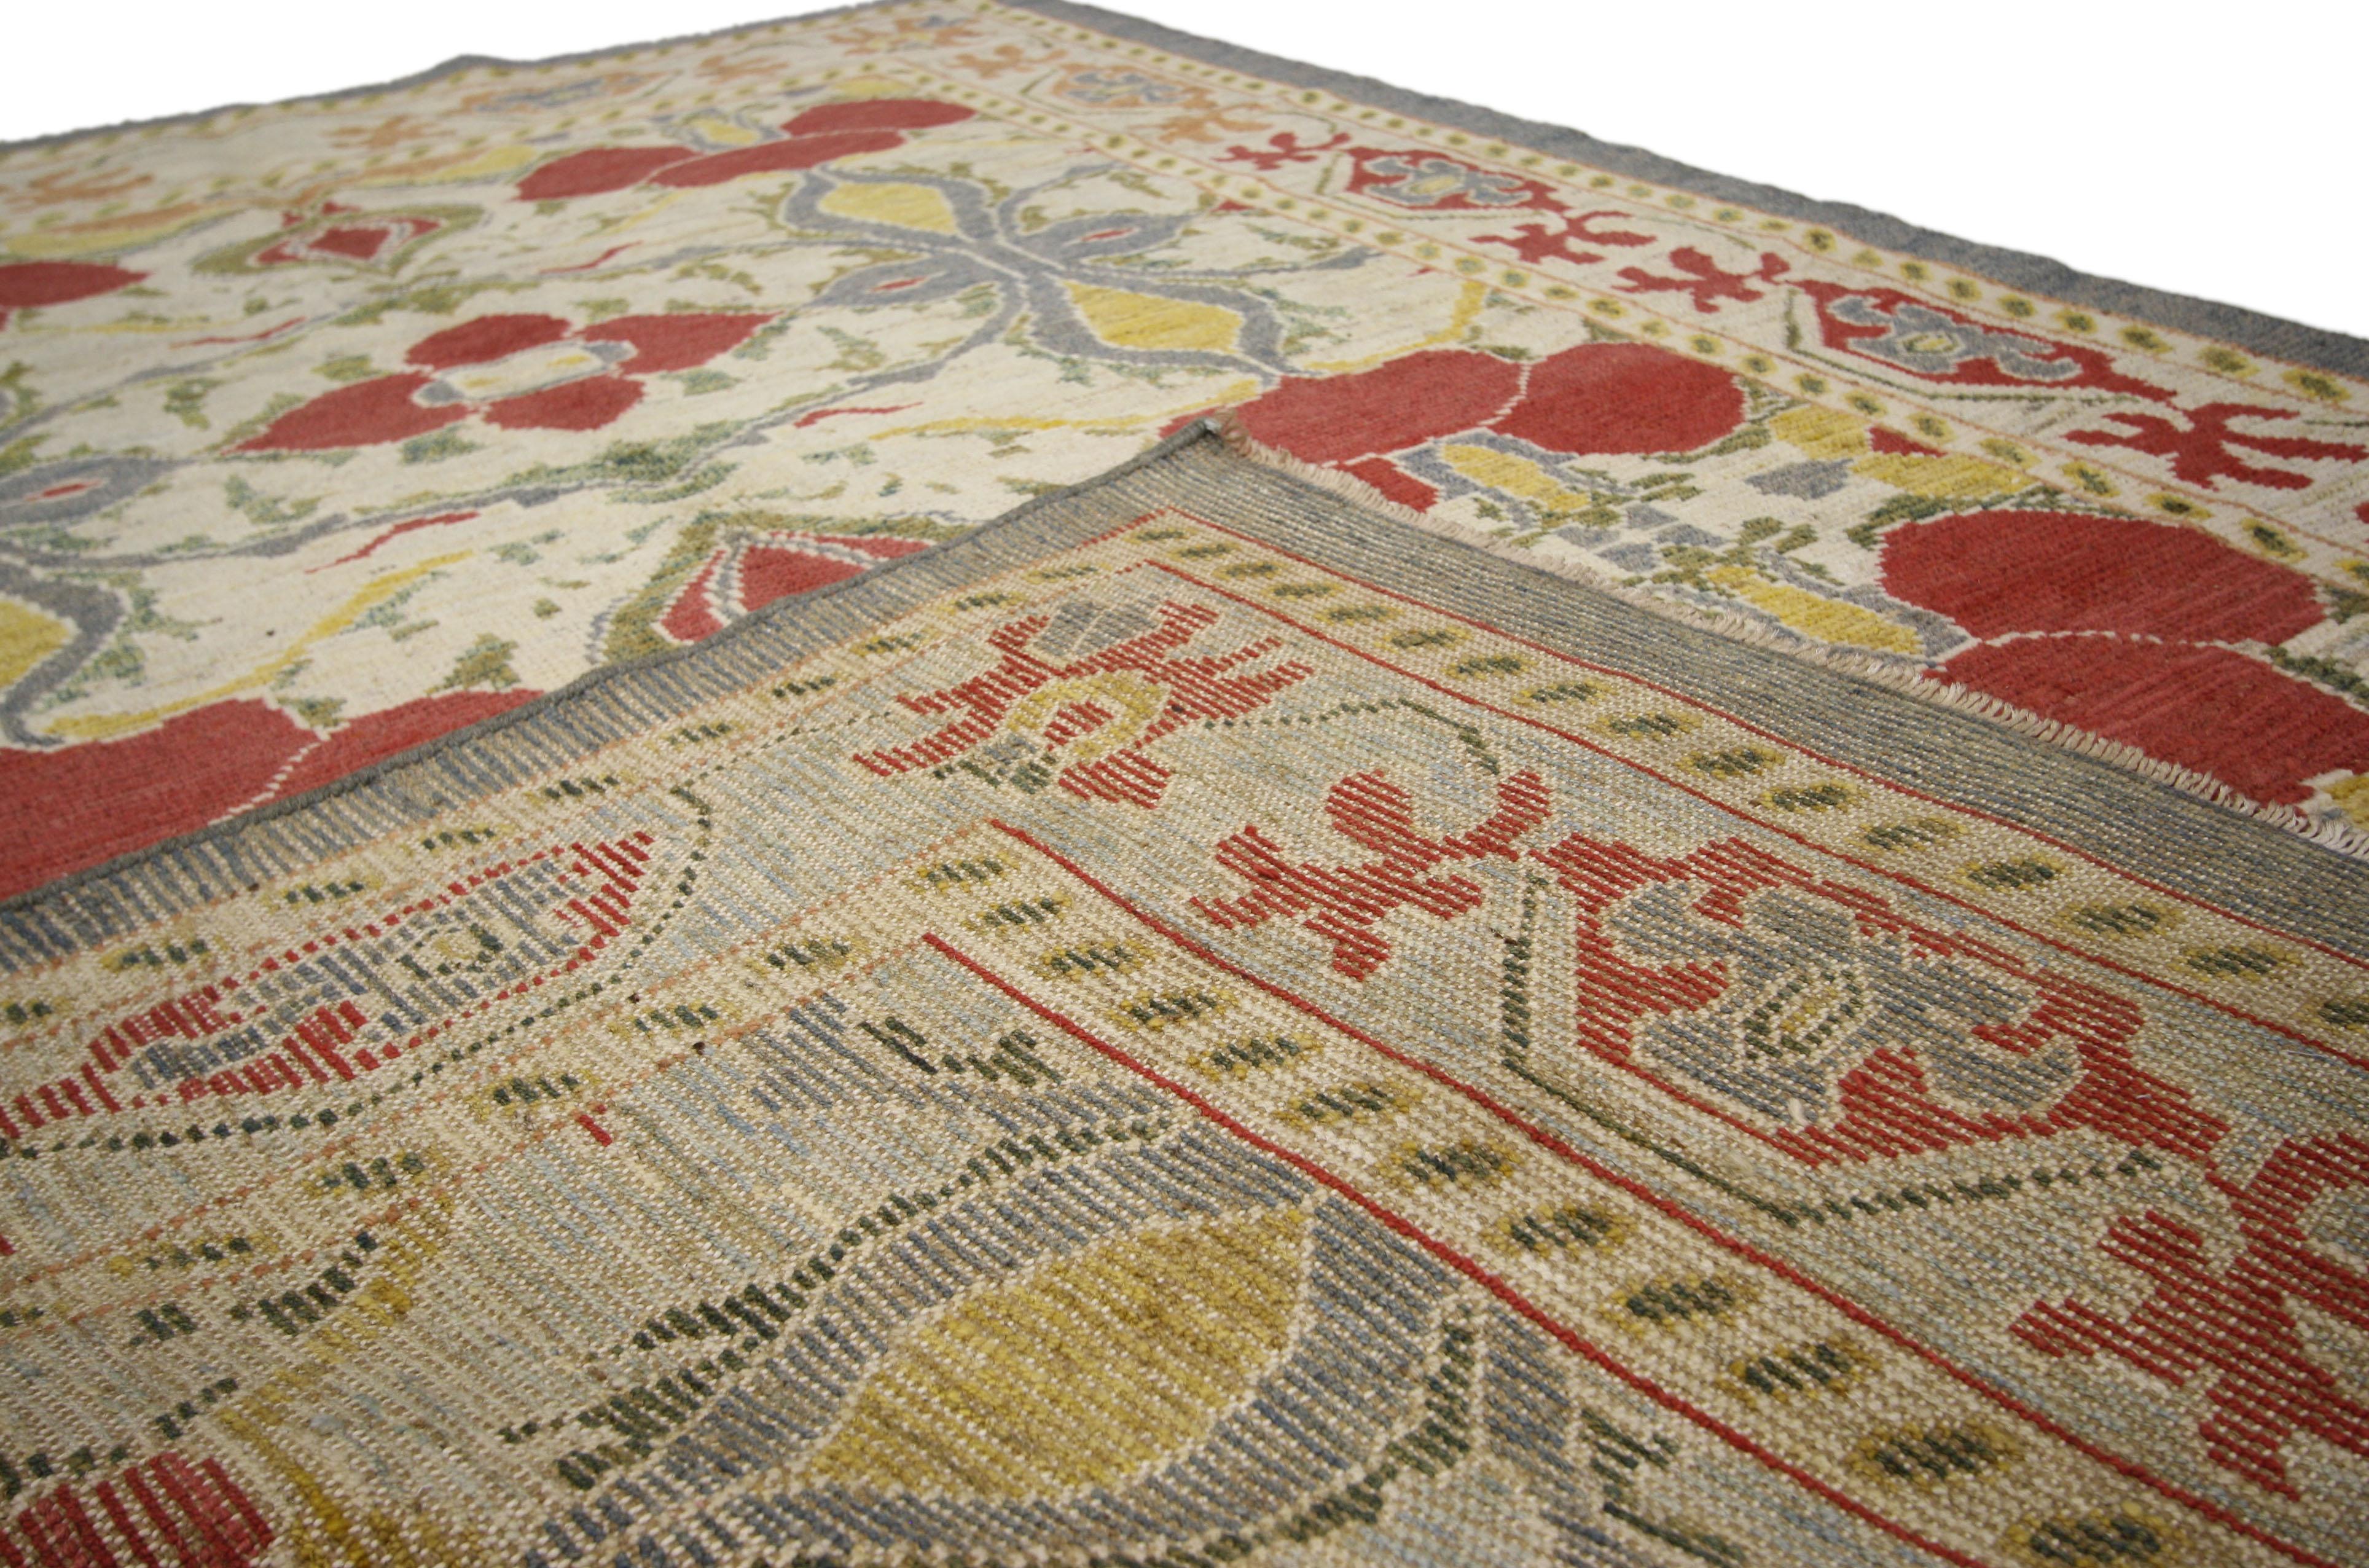 Contemporary New Turkish Oushak Rug with Arts & Crafts Style Inspired by William Morris 